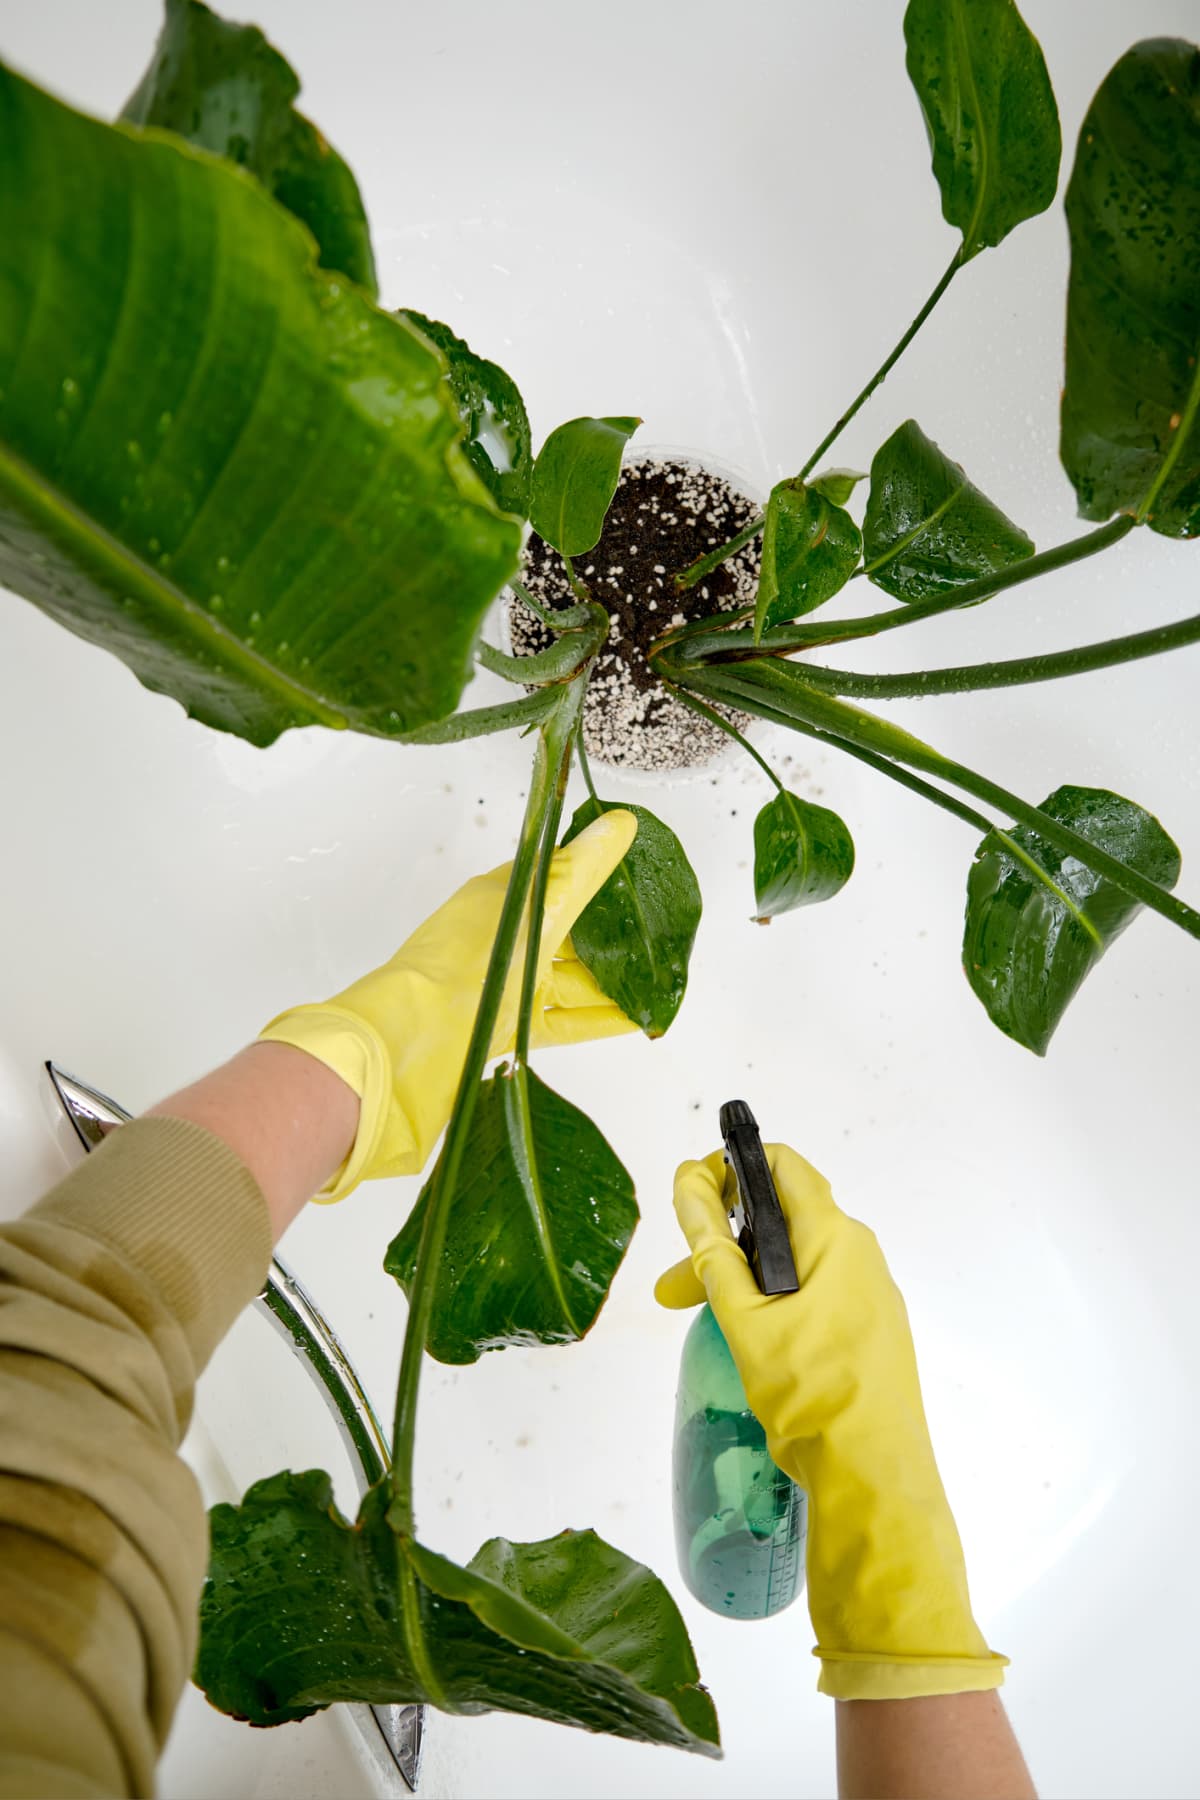 A person spraying house plant with gloved hands